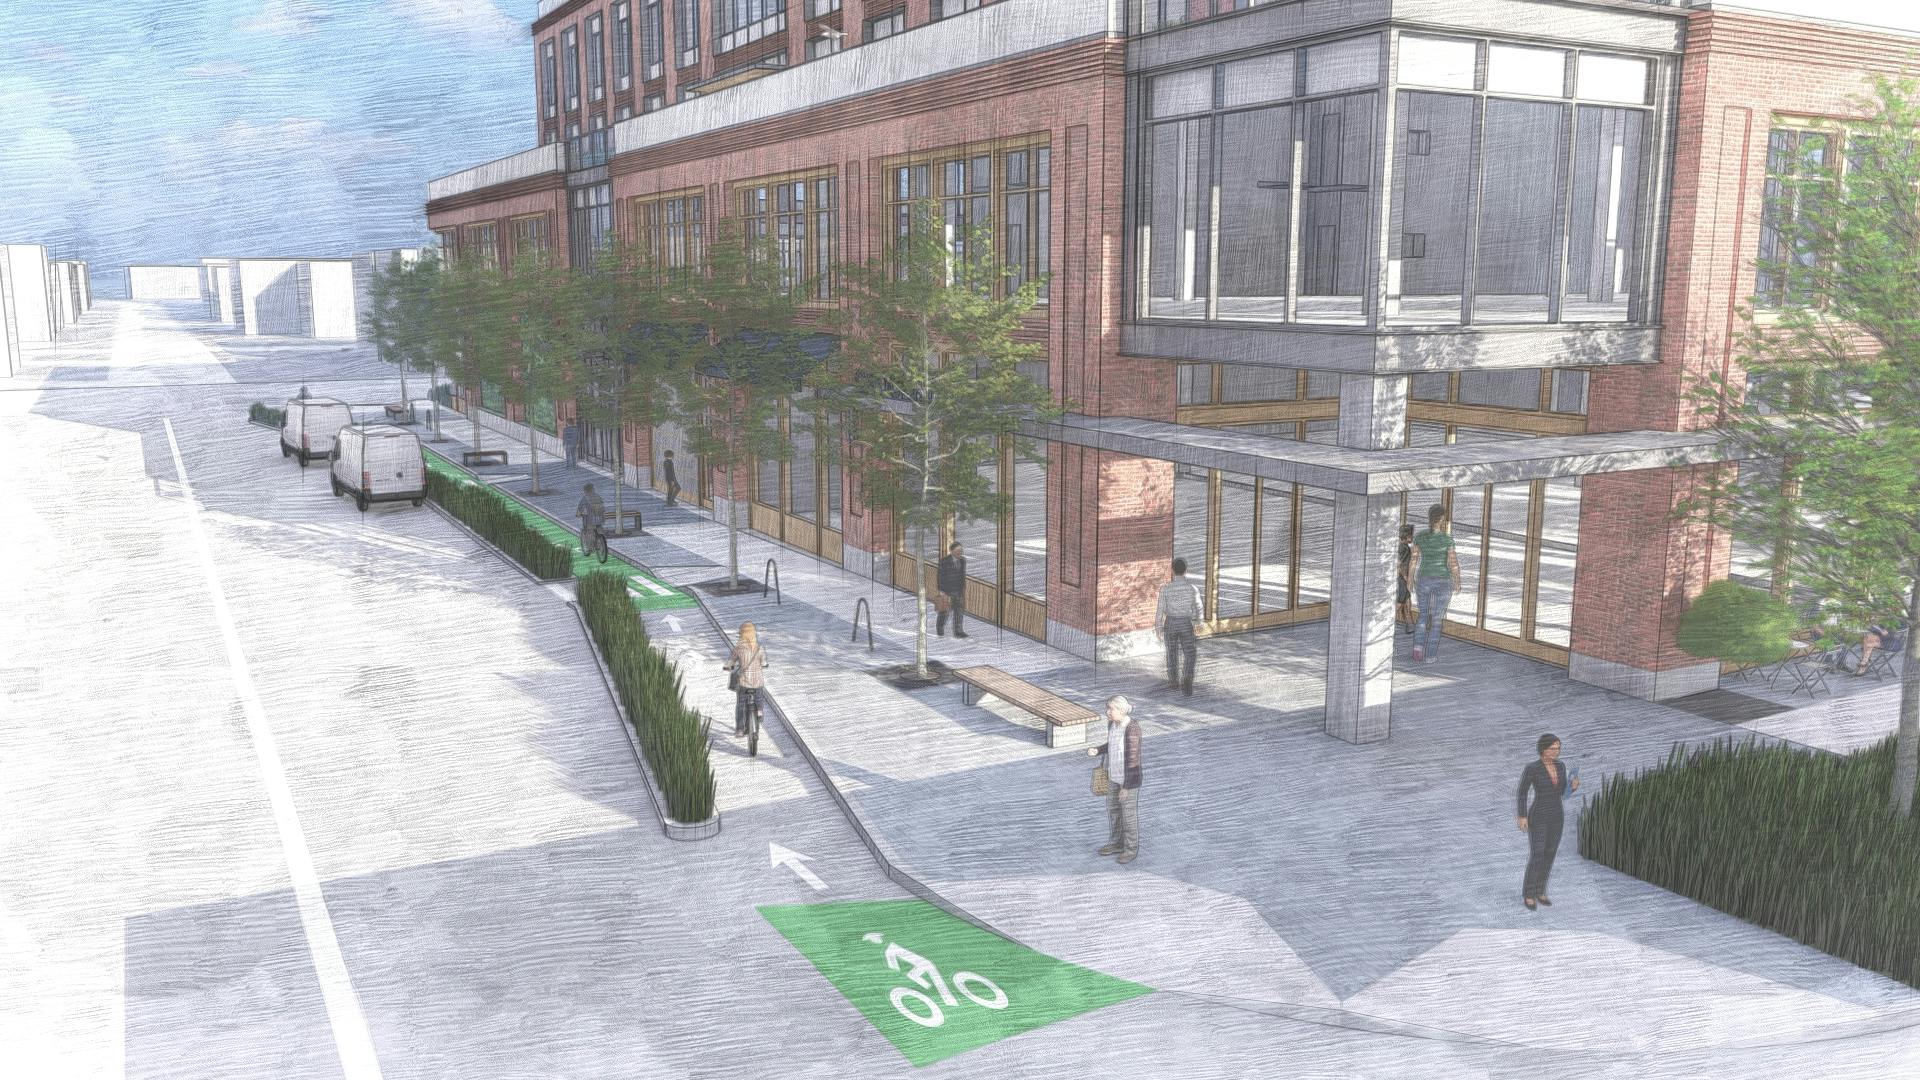 3D project of B Street South - view at an angle